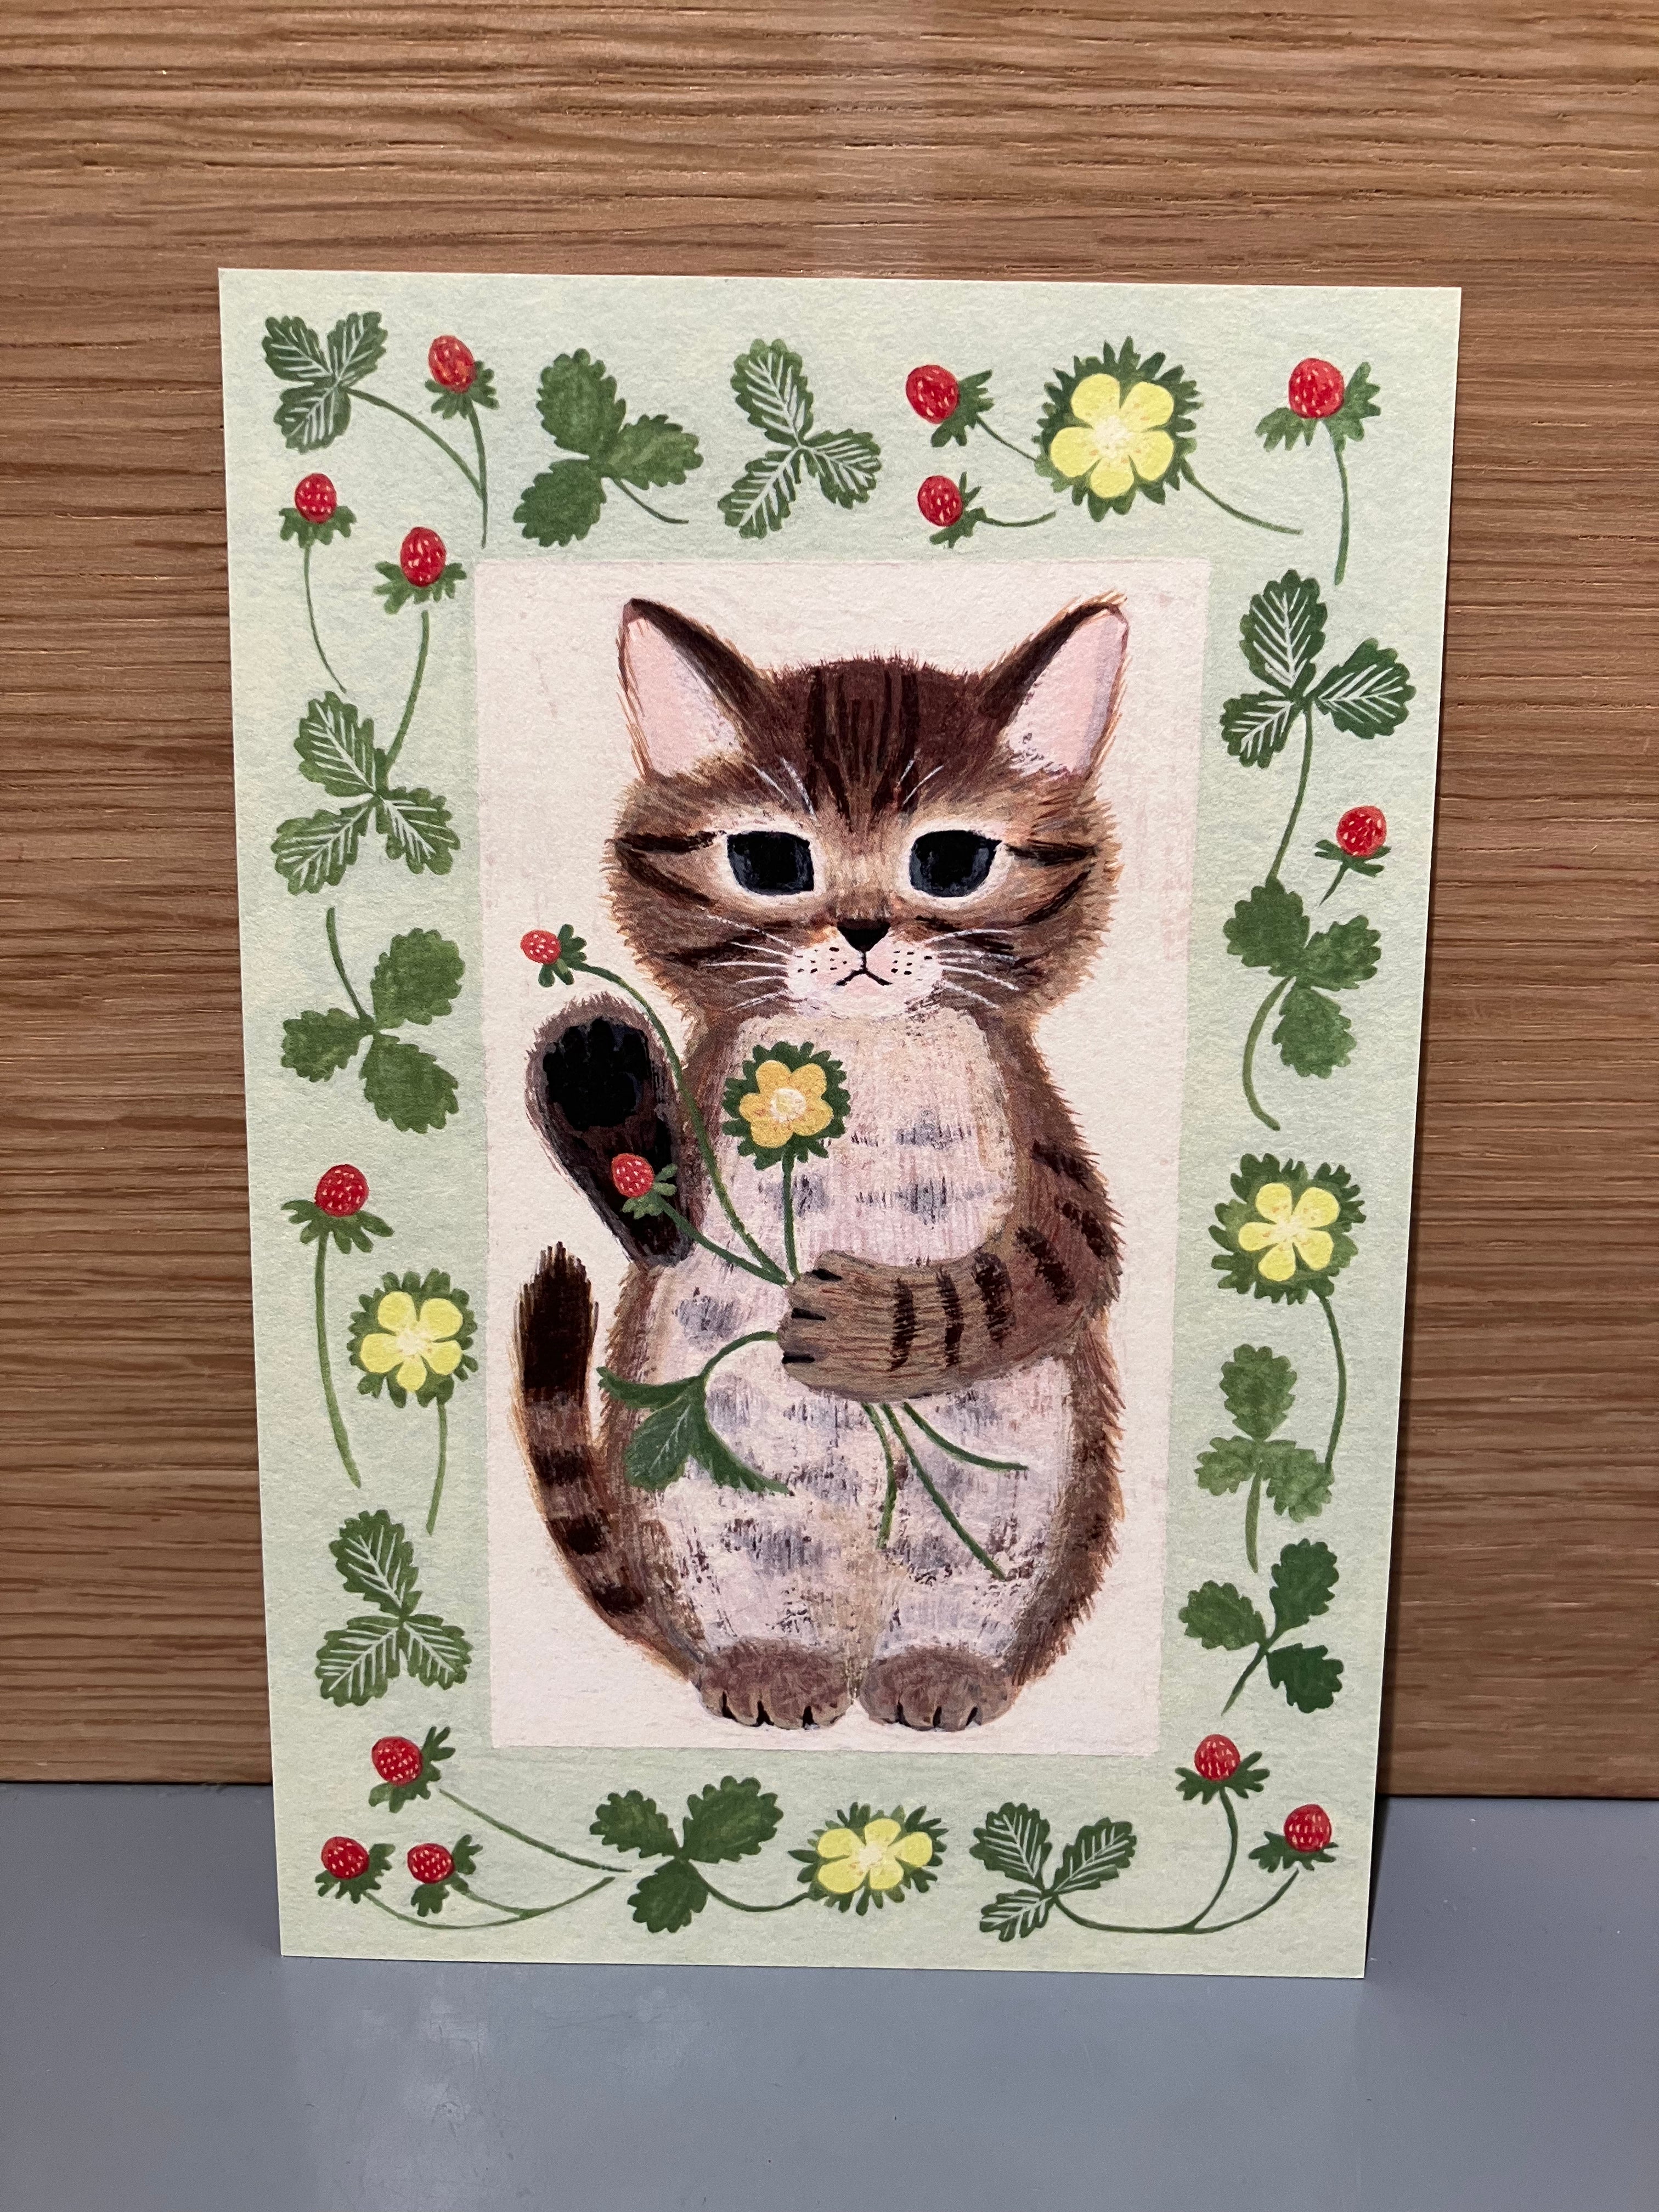 Japanese card green background, with a motif of a cat holding wild strawberries